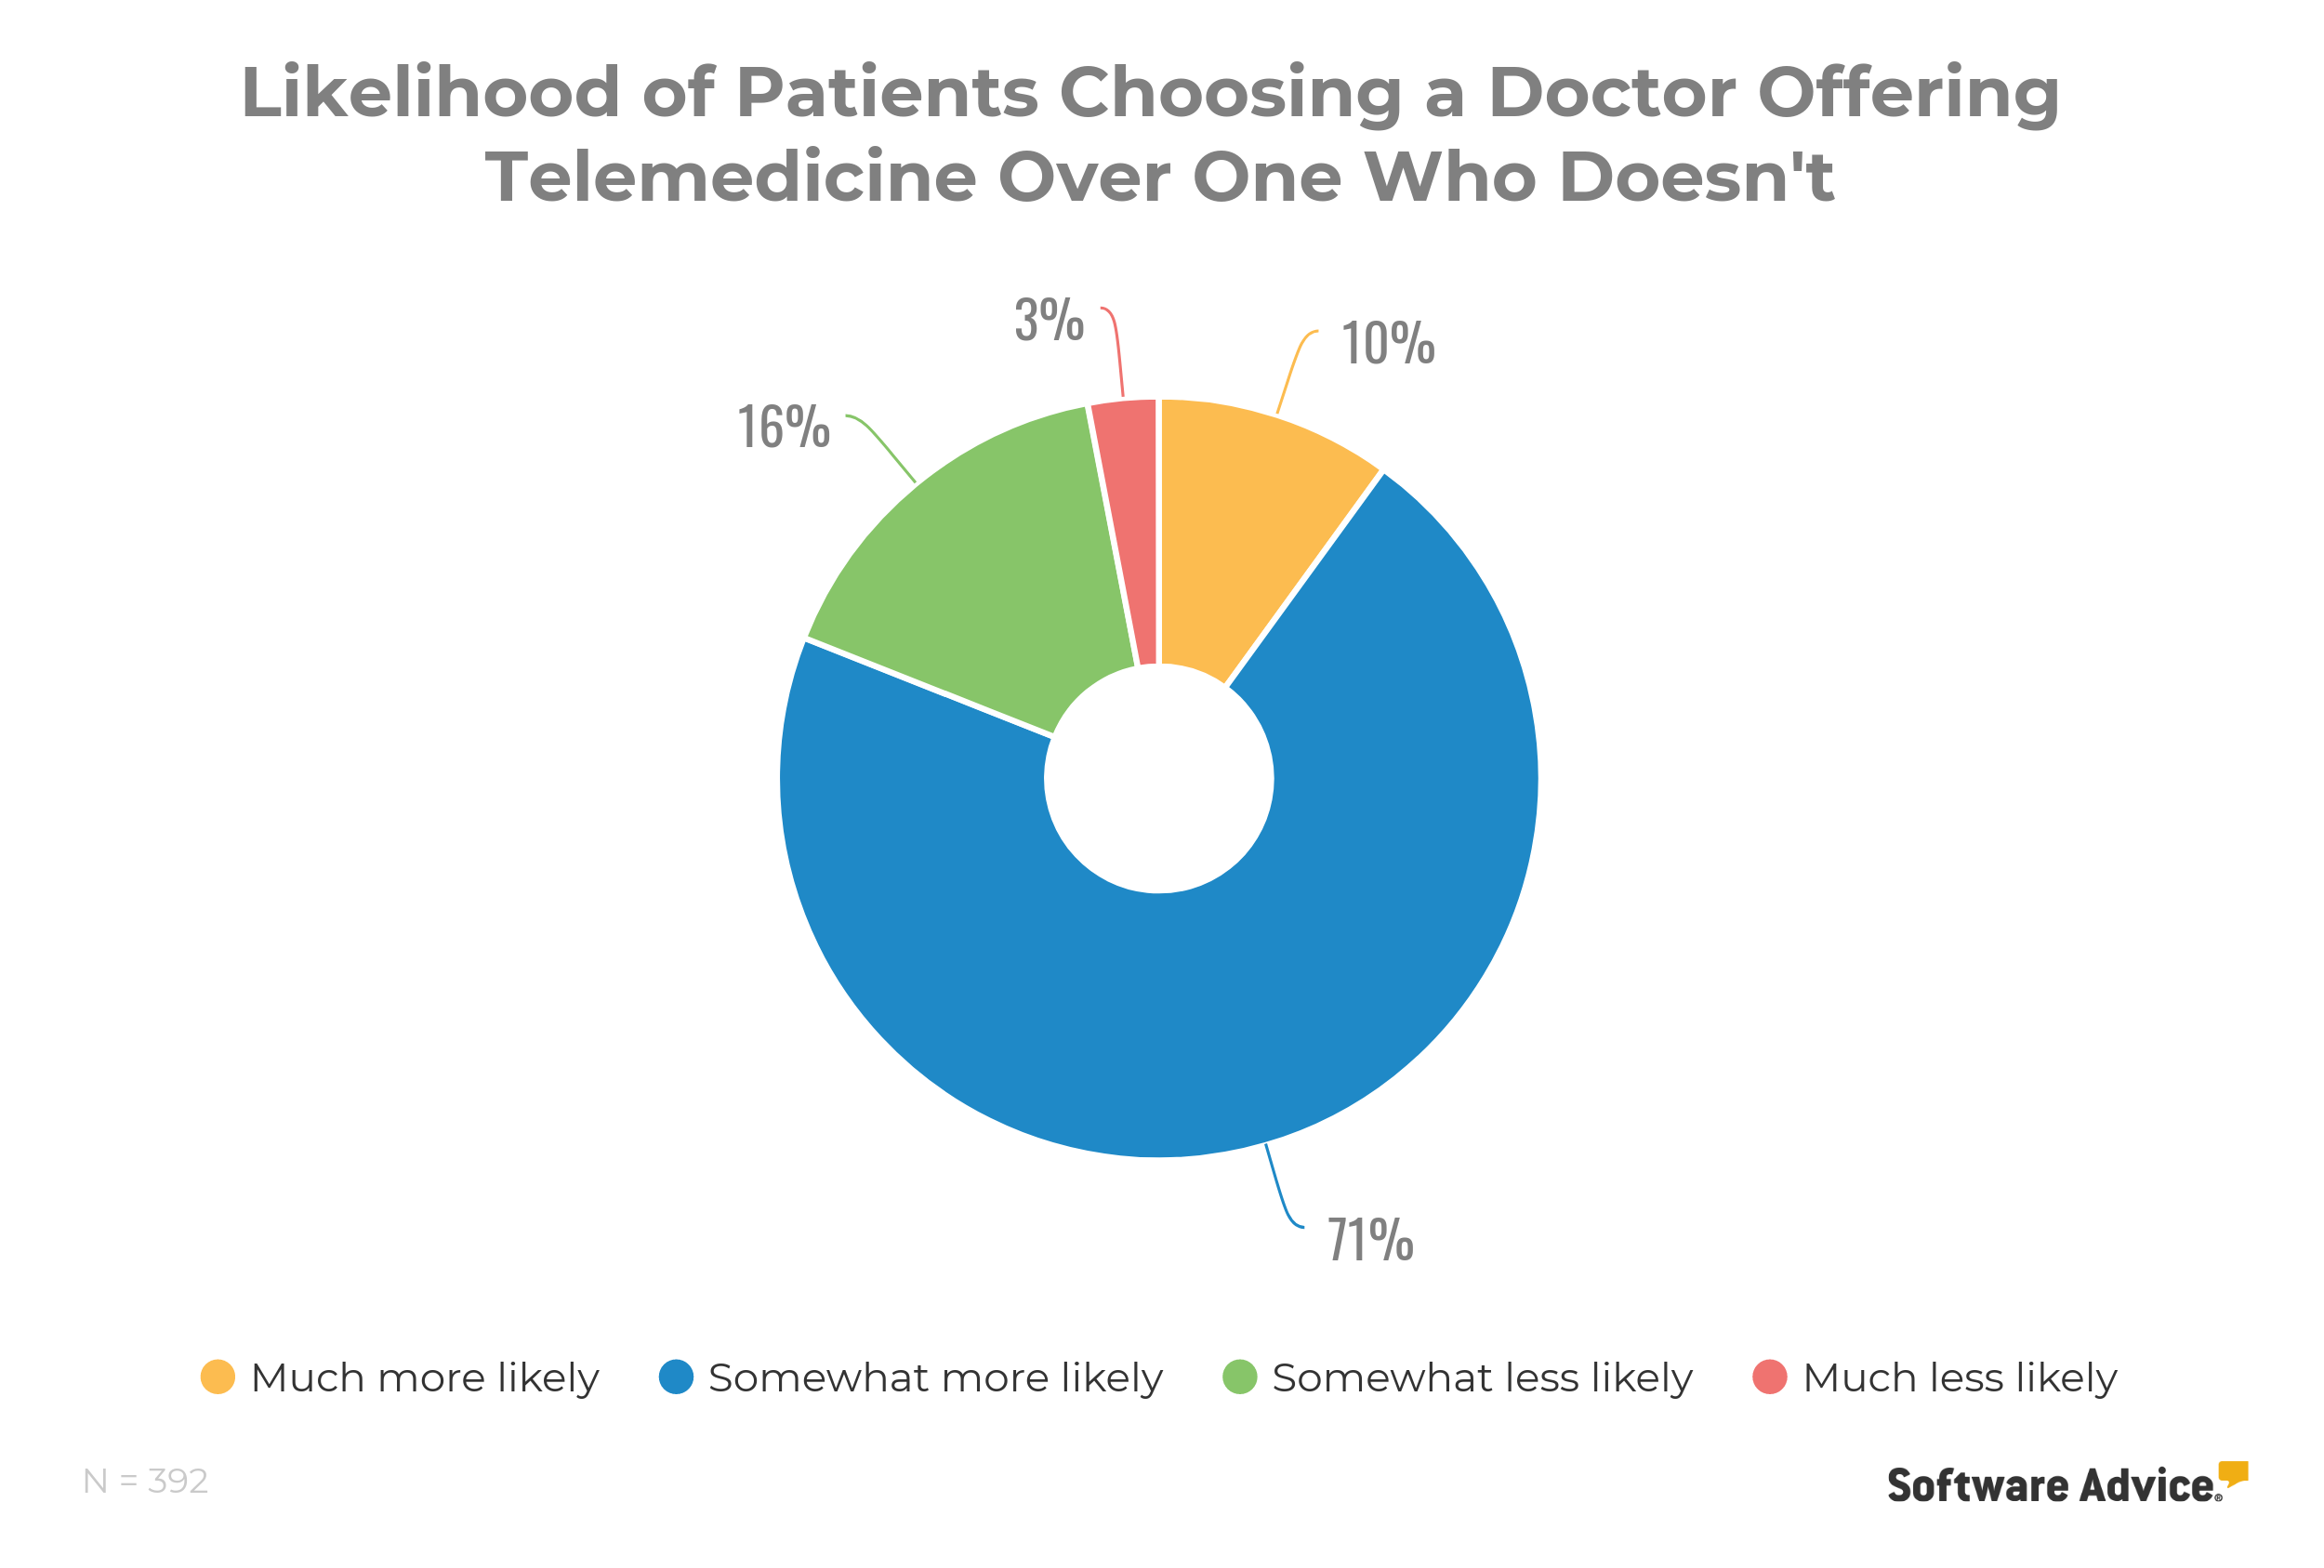 Patients-are-more-likely-to-choose-a-doctor-who-provides-telemedicine-over-one-who-doesn't